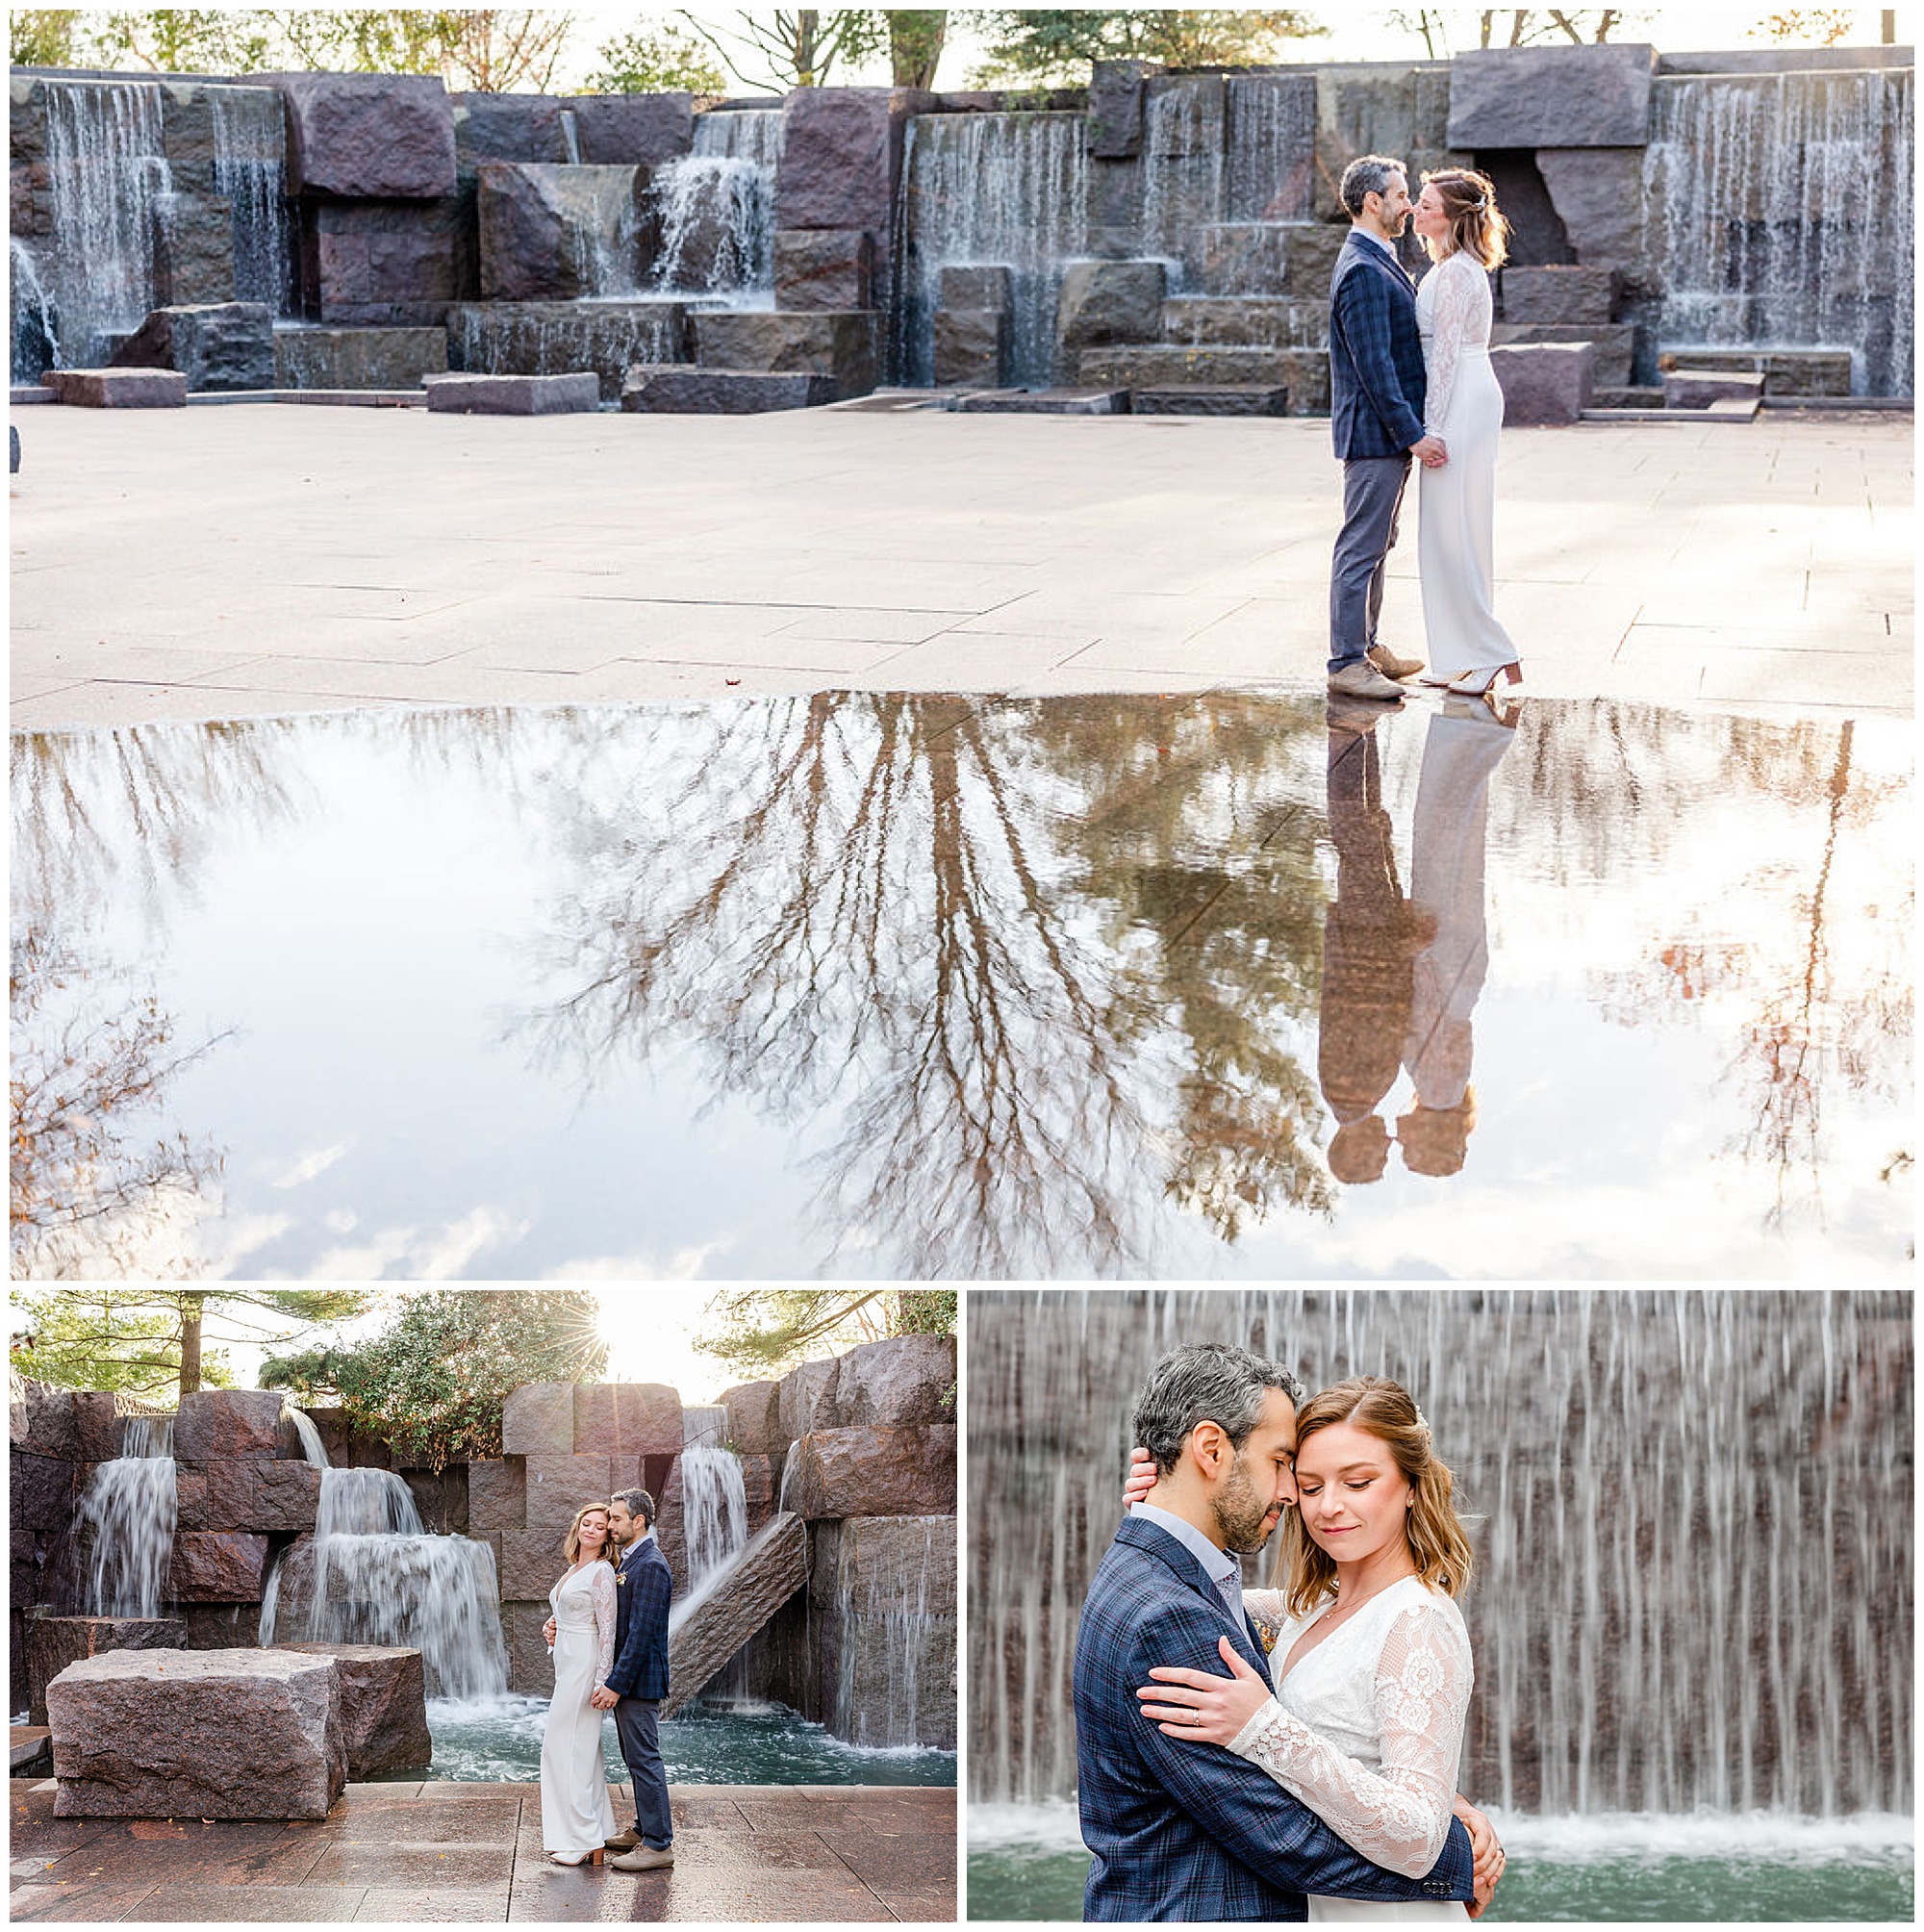 best of 2022 elopements and micro-weddings, best of weddings, best of 2022, DC wedding photographer, DC micro-wedding photographer, DC elopement photographer, Alexandria elopement photographer, Old Town elopement photographer, Rachel E.H. Photography, couple in front of waterfall, couple kissing, reflection in puddle